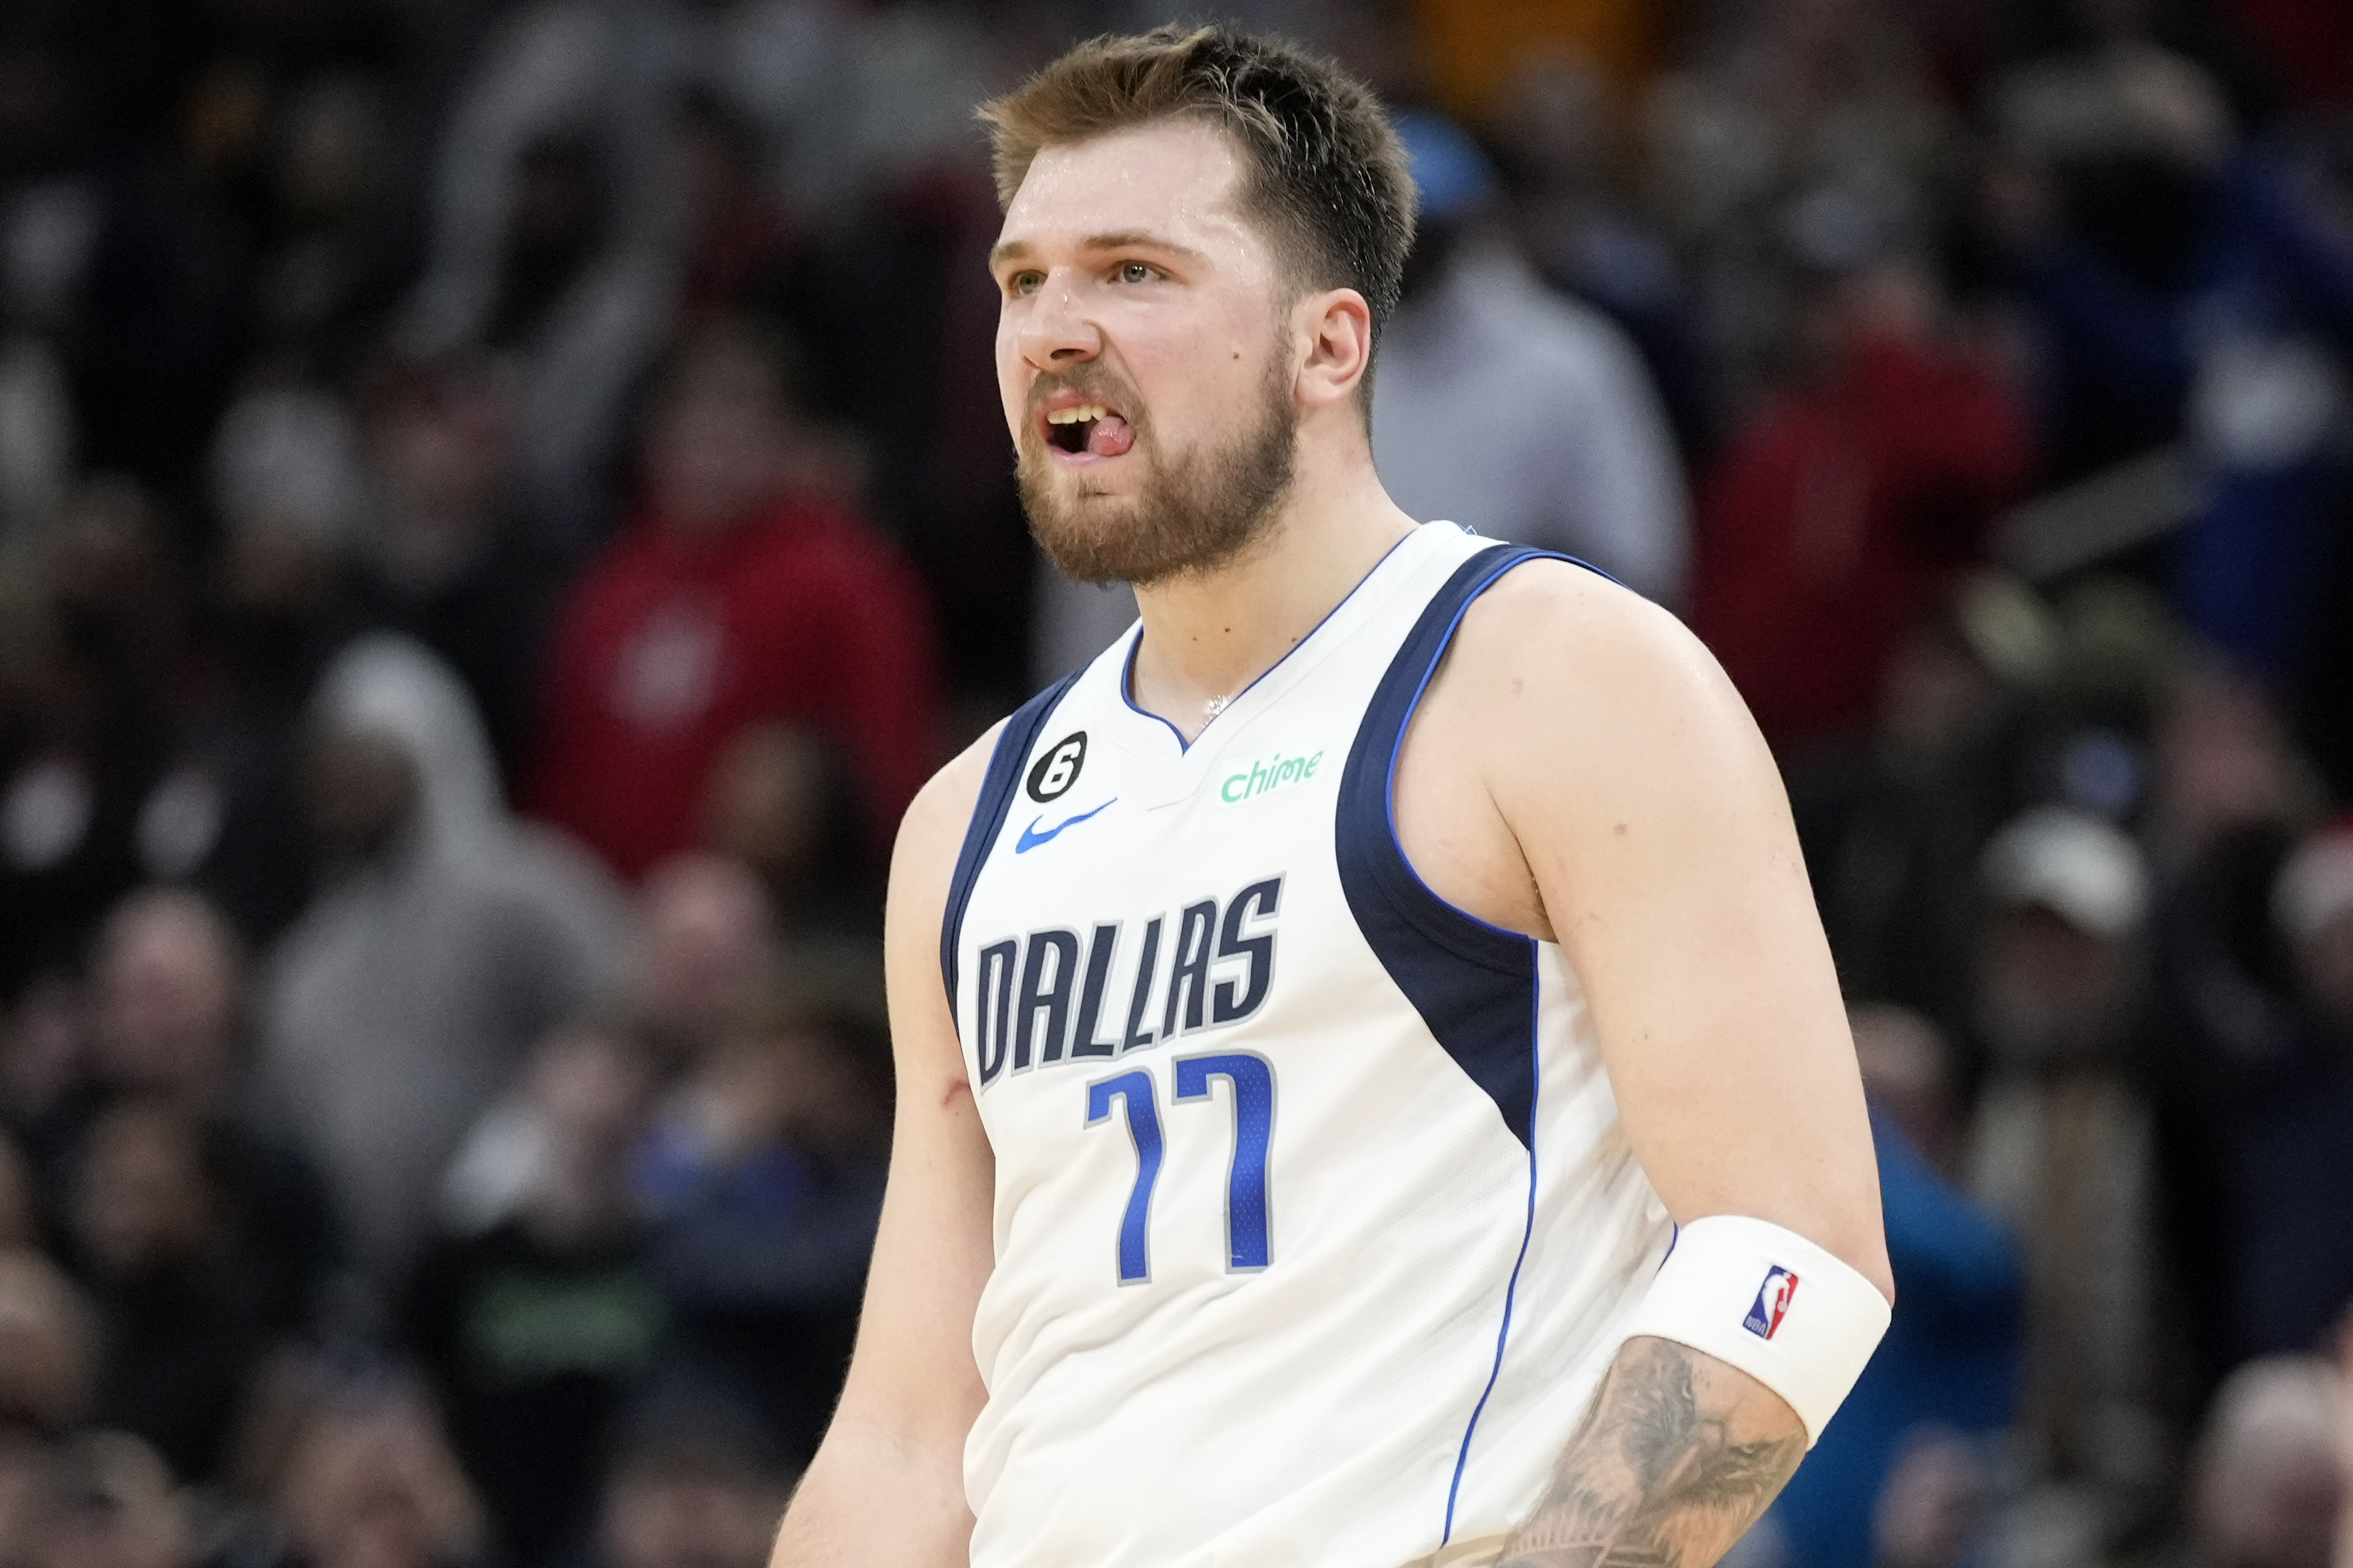 Shoulda known Luka was dropping 50 when he pulled up in the new whip :  r/Mavericks